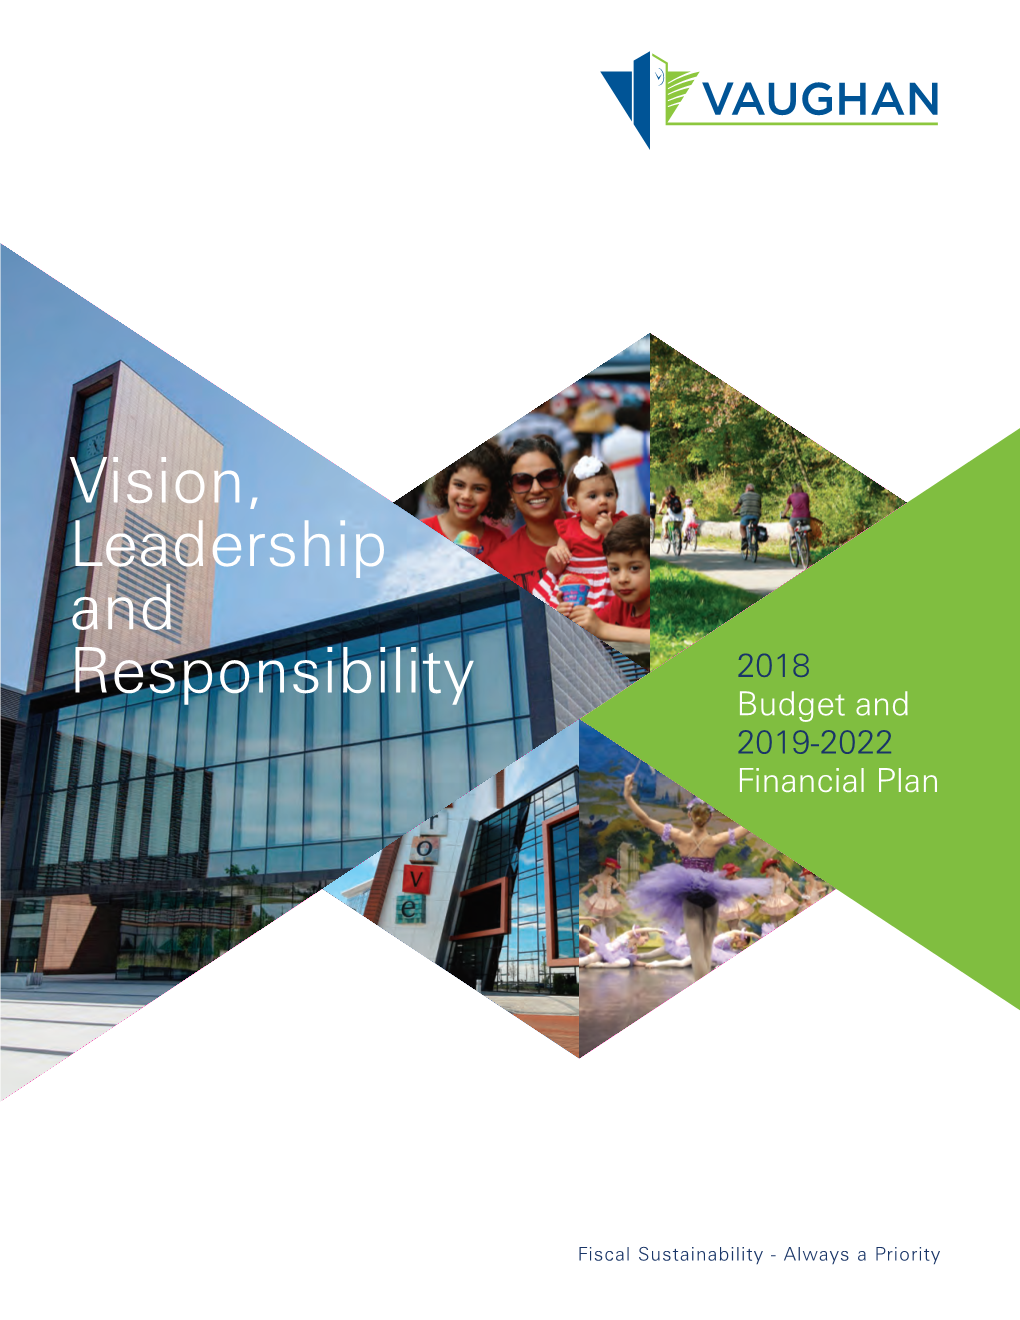 Vision, Leadership and Responsibility 2018 Budget and 2019-2022 Financial Plan